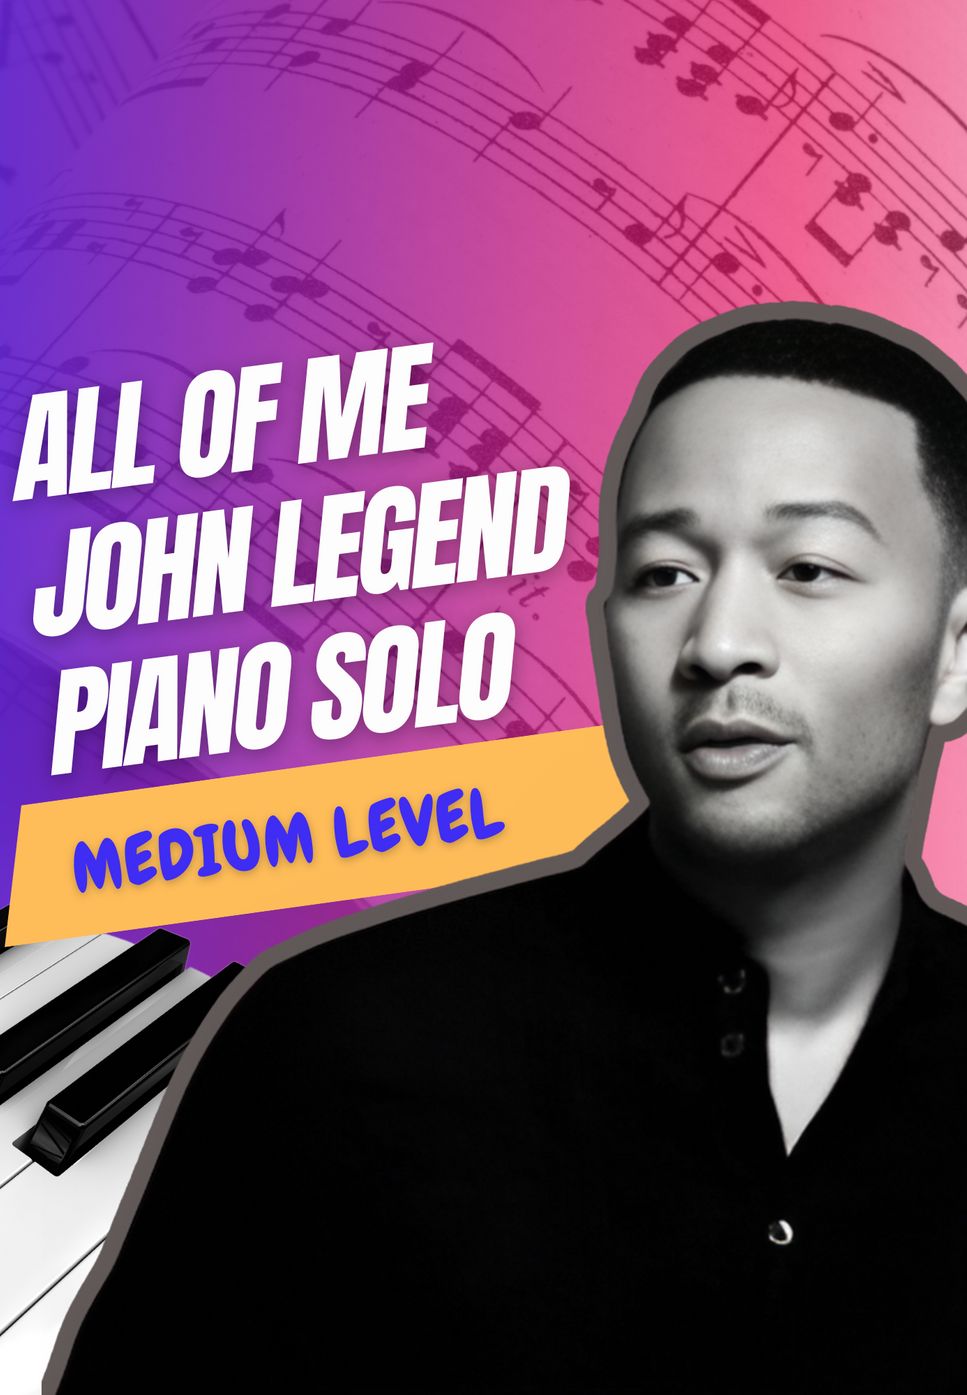 John Legend - All Of Me (beautiful pop song for piano solo) by GAD SONGS